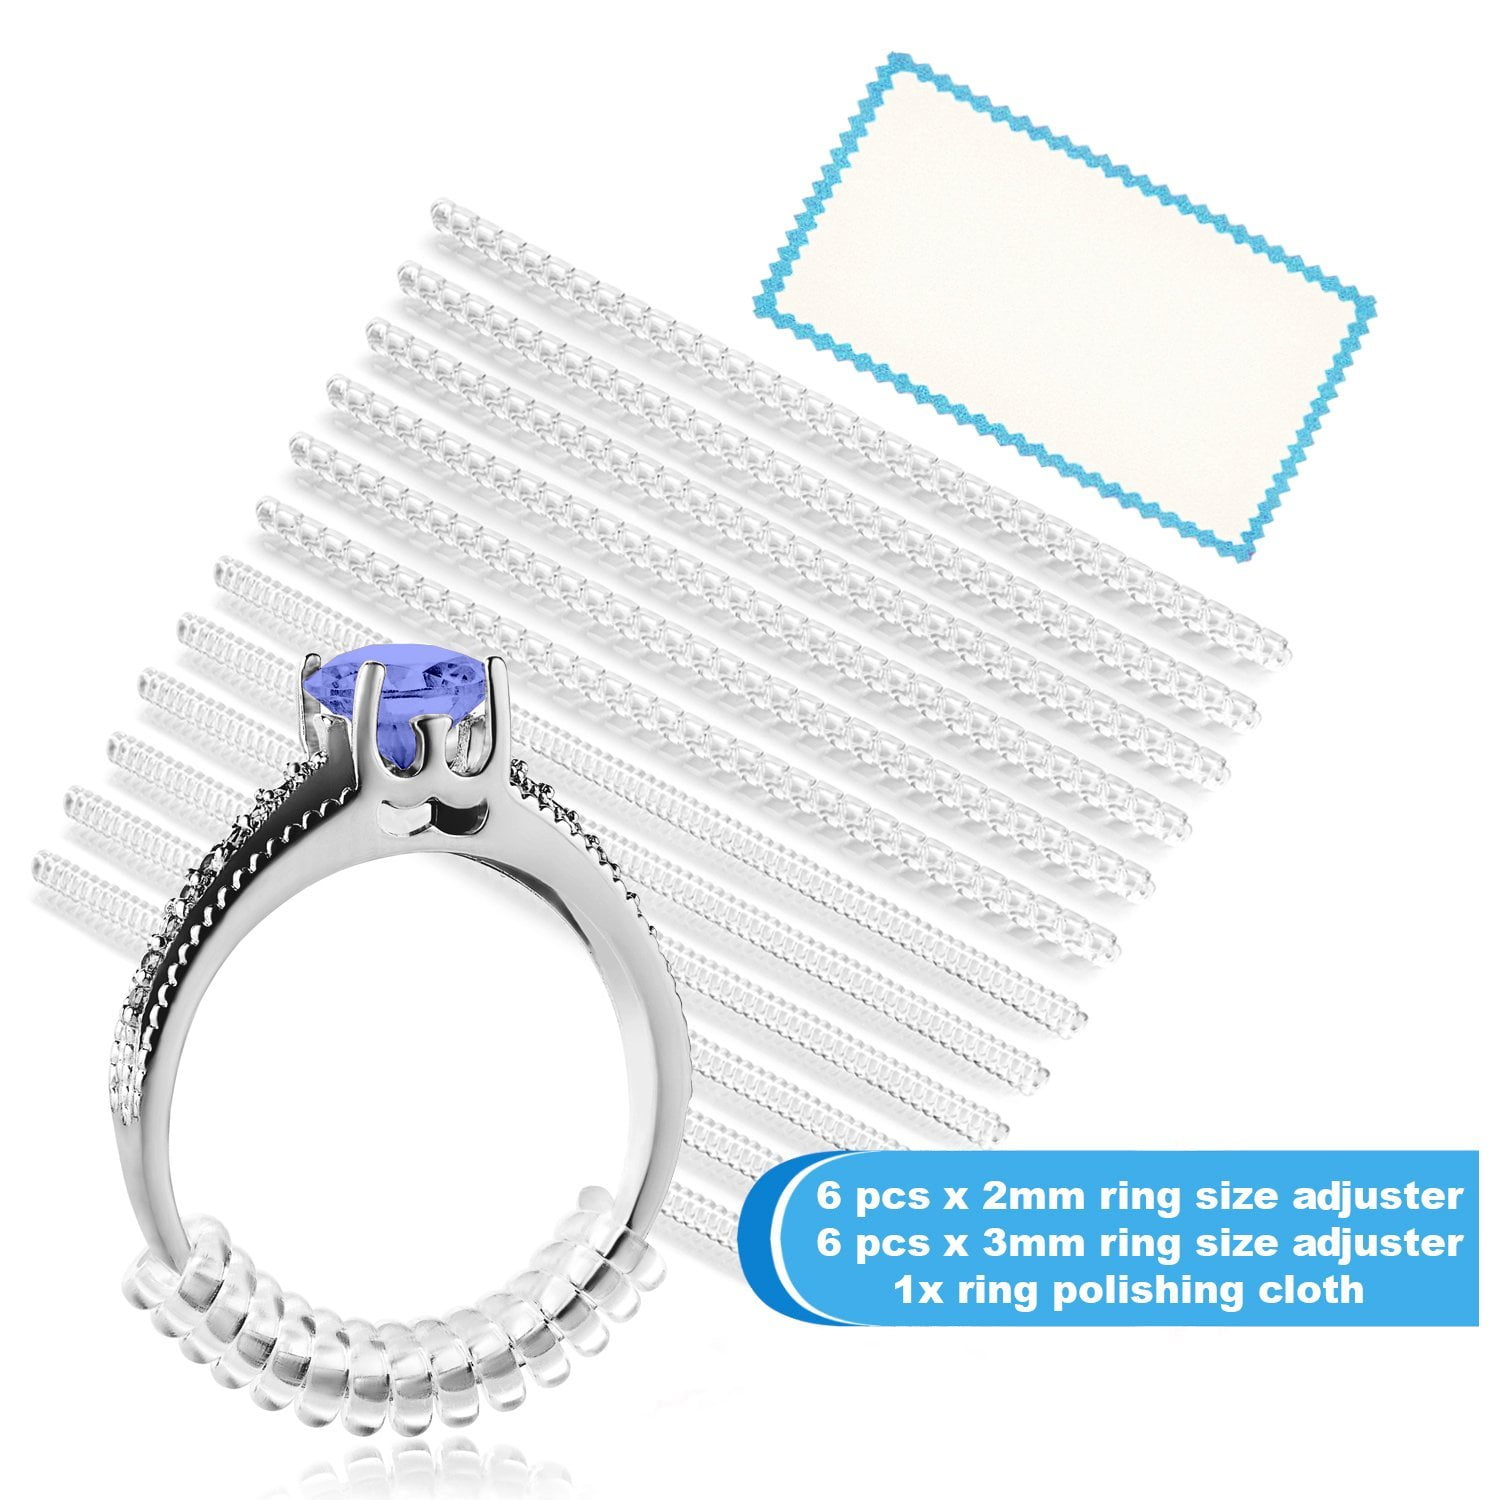 34 Pcs/Set Silicone Invisible Clear Loose Rings Reducer Ring Sizer Guard  Tightener Ring Size Adjuster Resizer Resizing Jewelry Tools - buy 34  Pcs/Set Silicone Invisible Clear Loose Rings Reducer Ring Sizer Guard